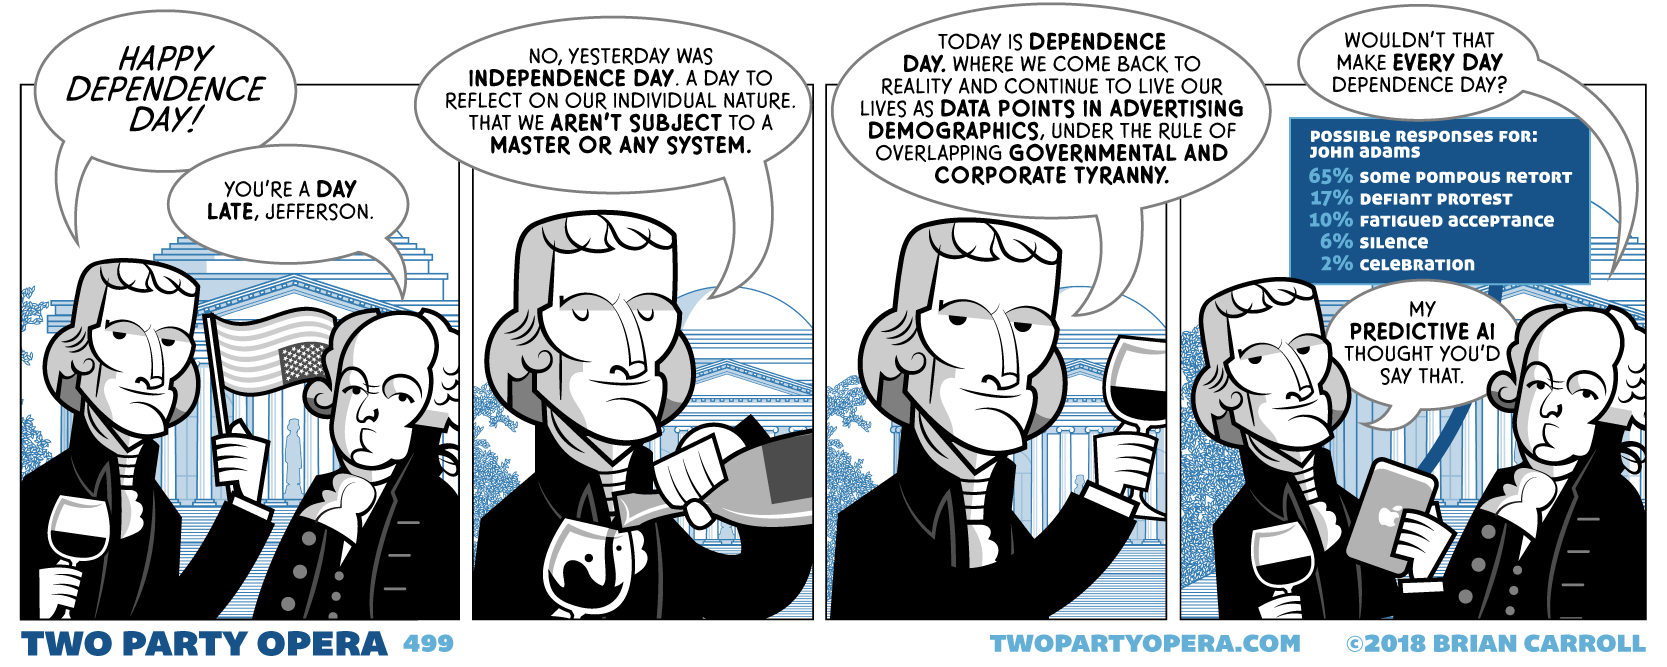 Dependence Day